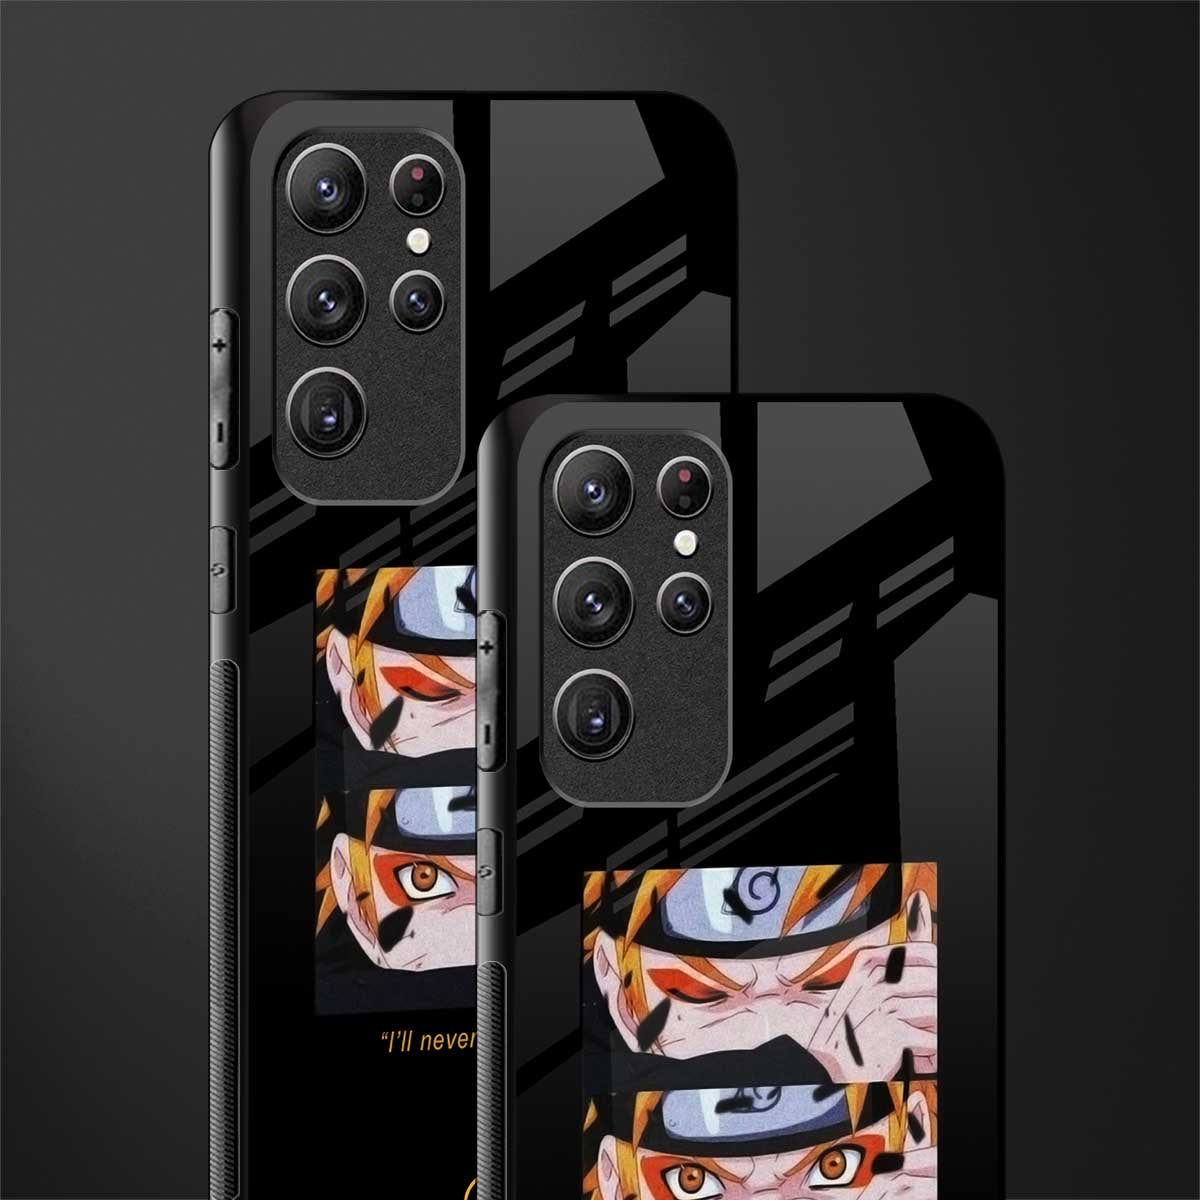 Buy Anime Samsung Case Online In India  Etsy India